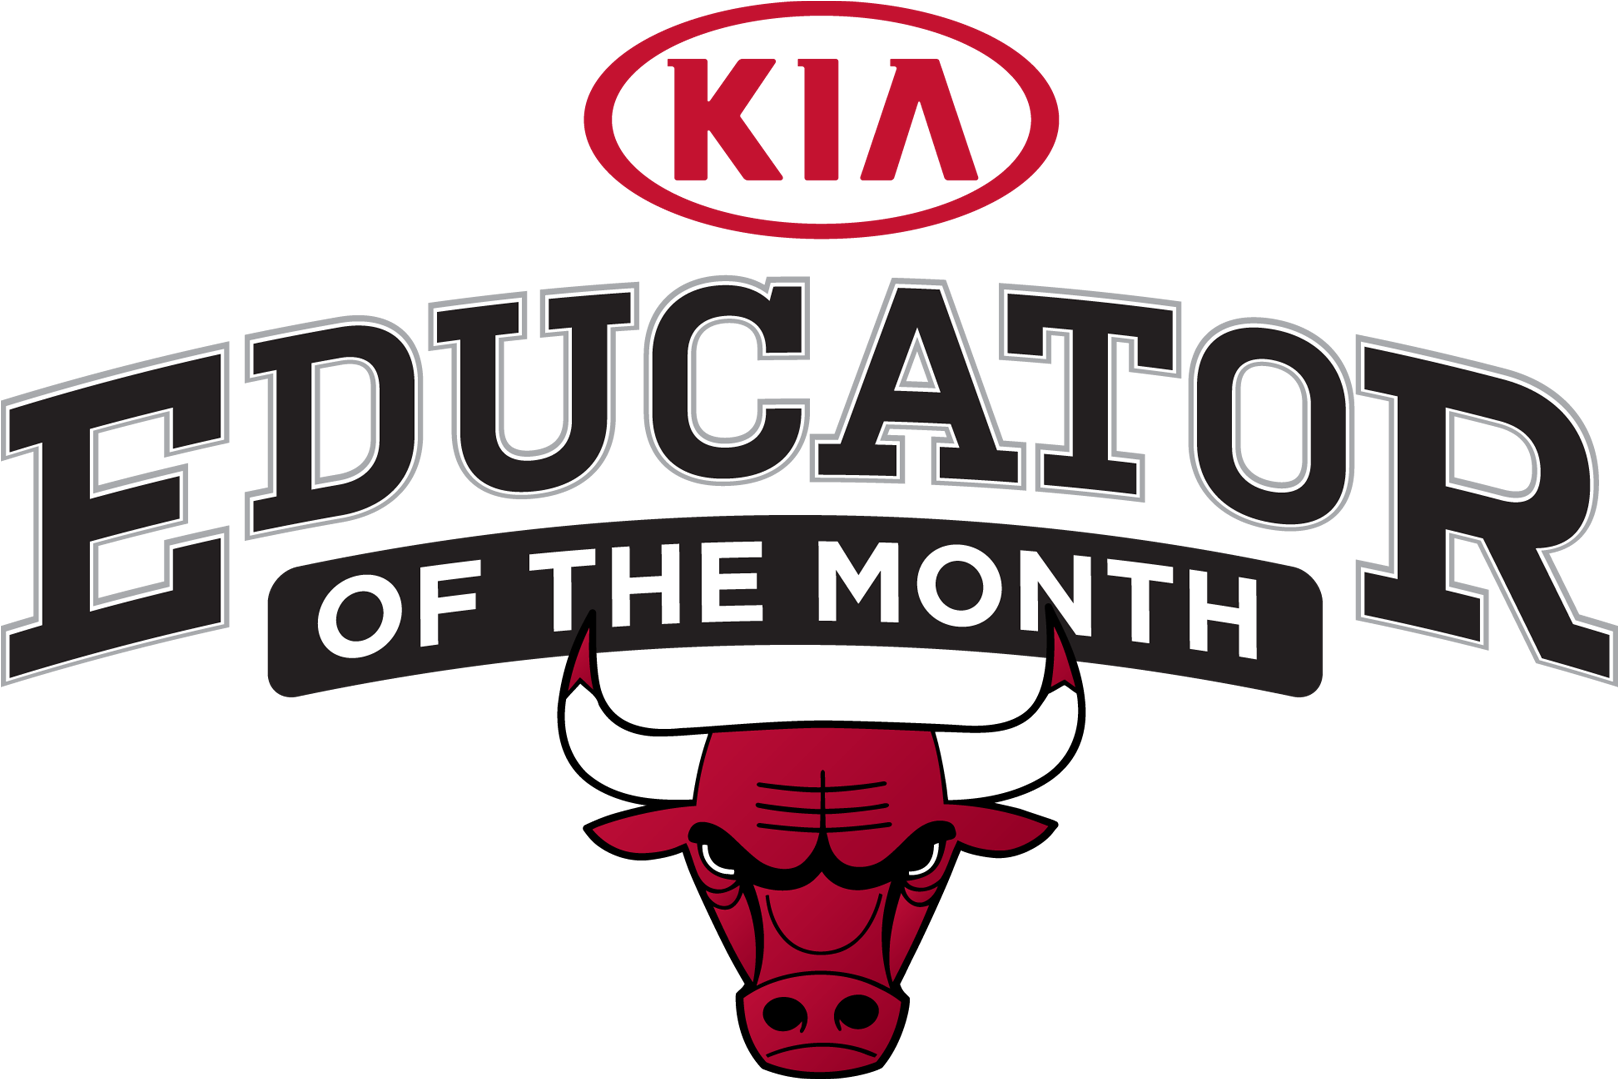 Bulls Educator Of The Month - Education Matters (1943x1296)